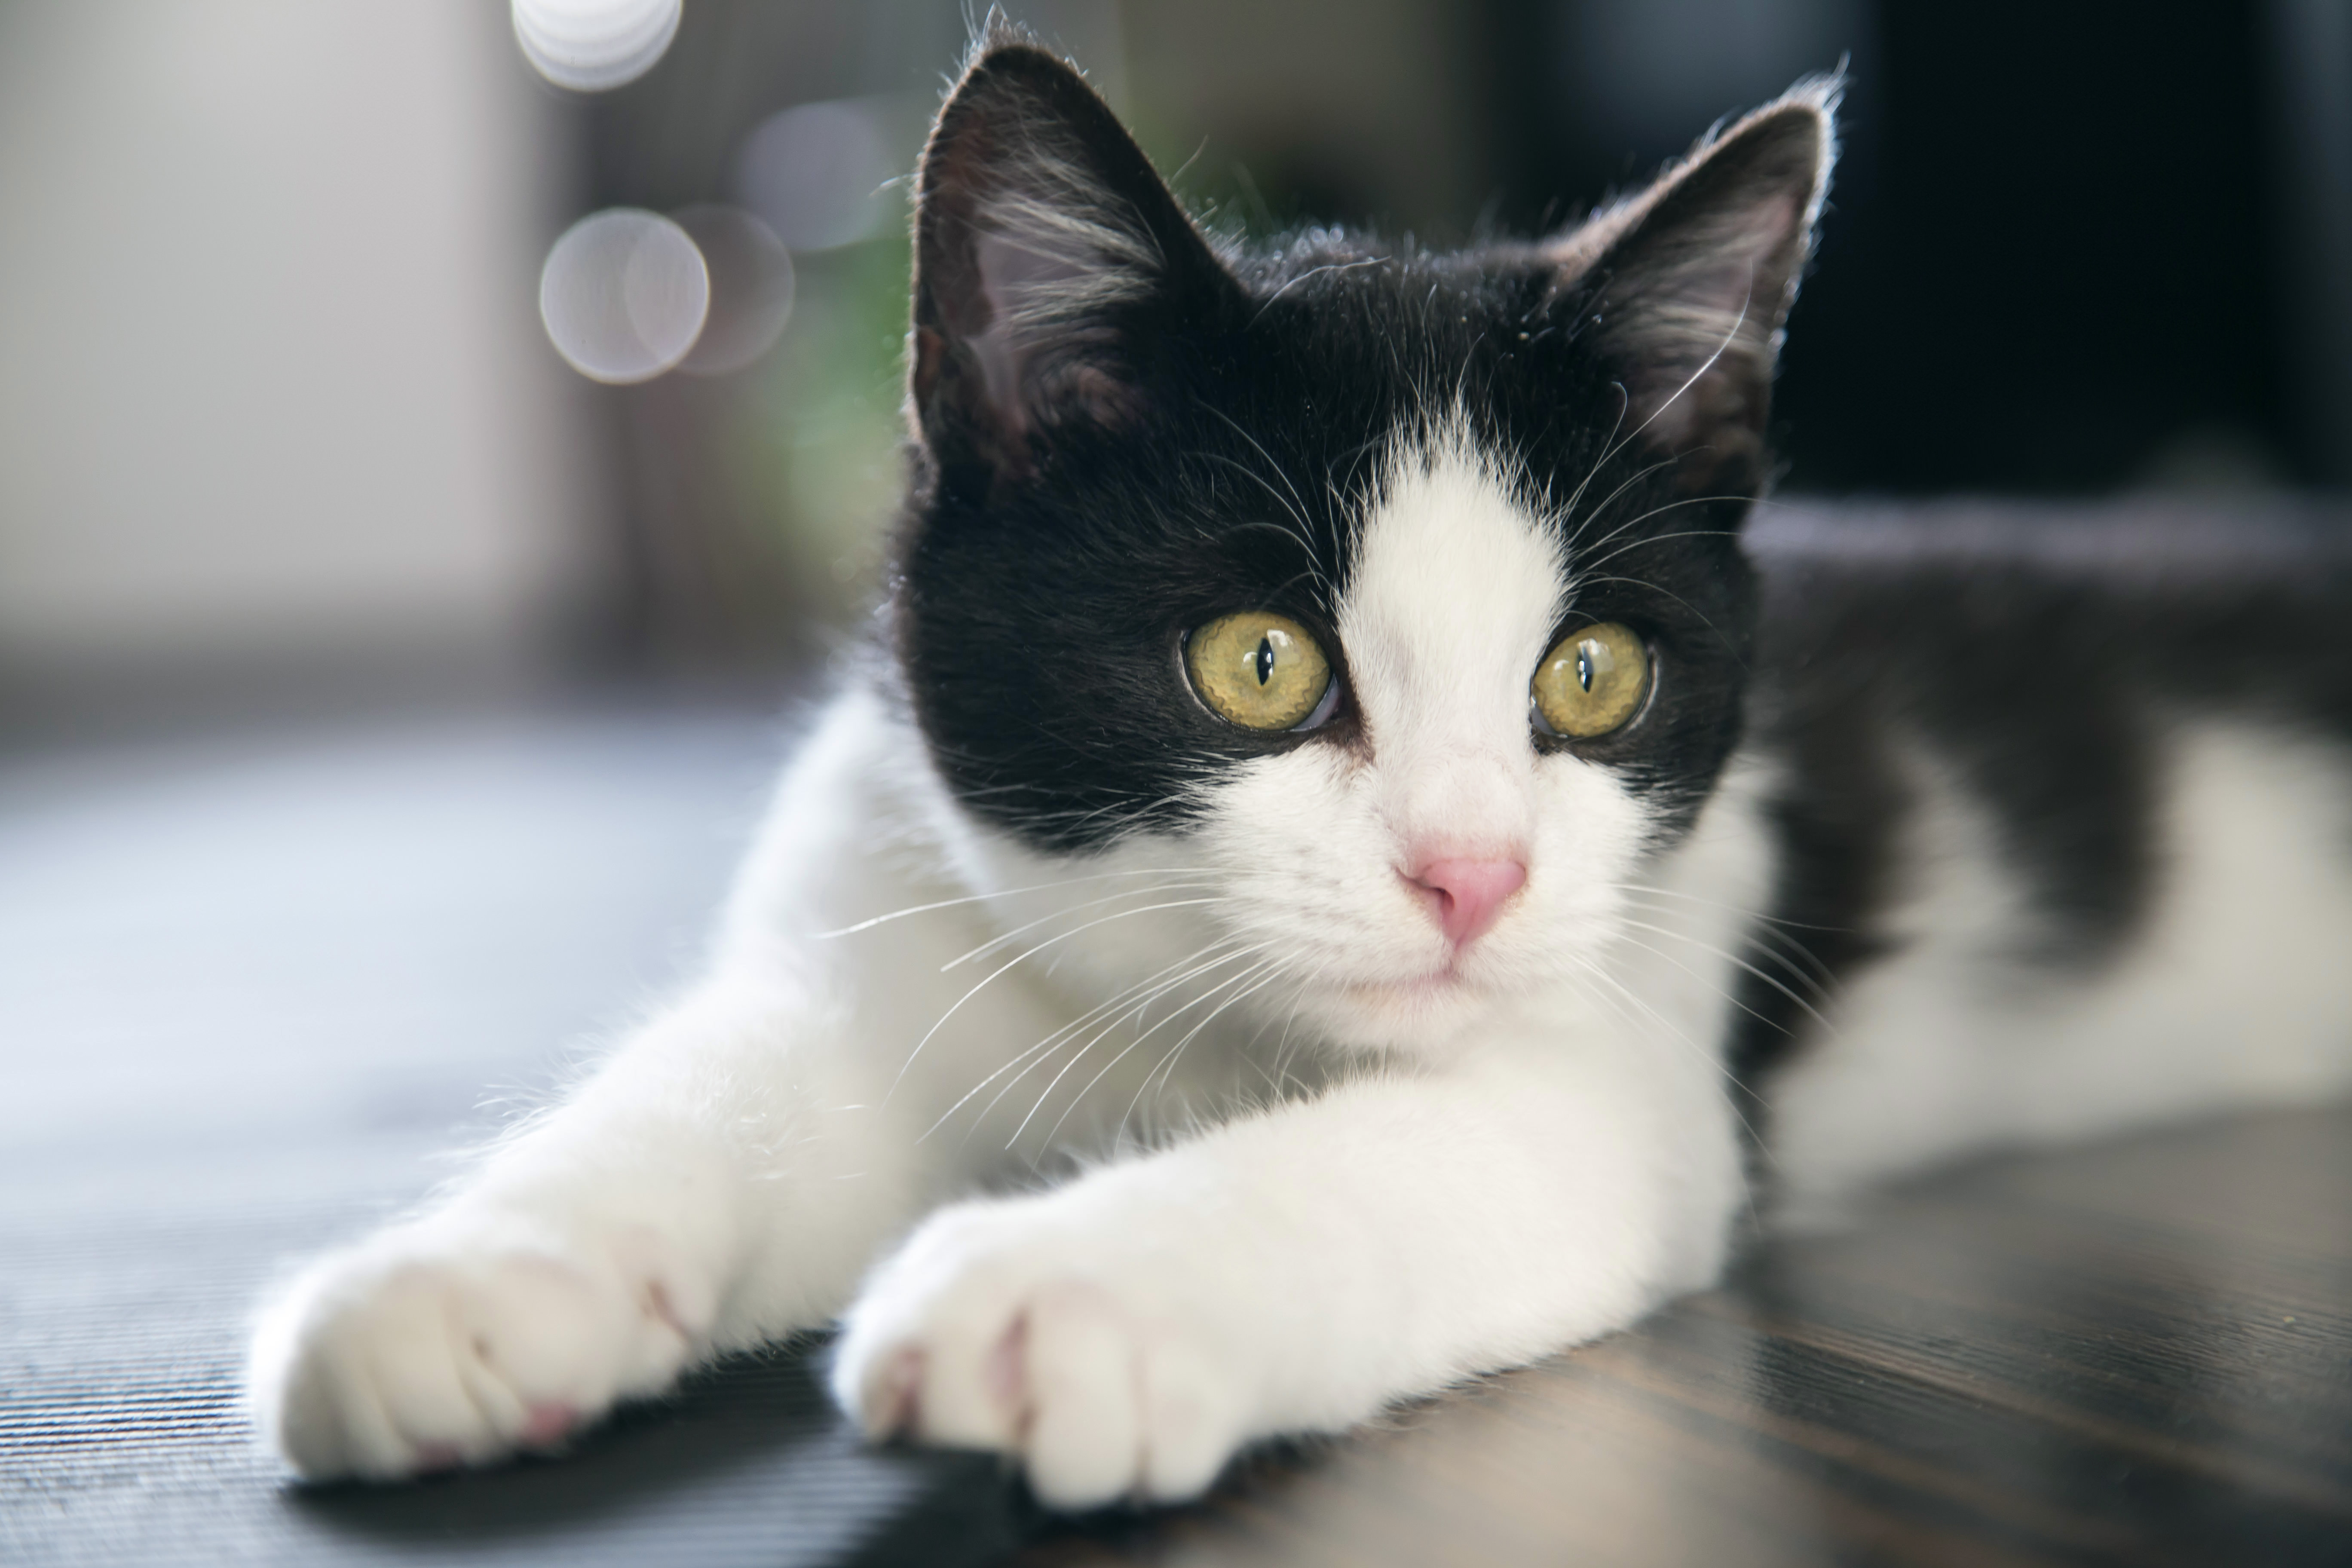 15 Clever Names For Your Tuxedo Cat,Manhattan Drink